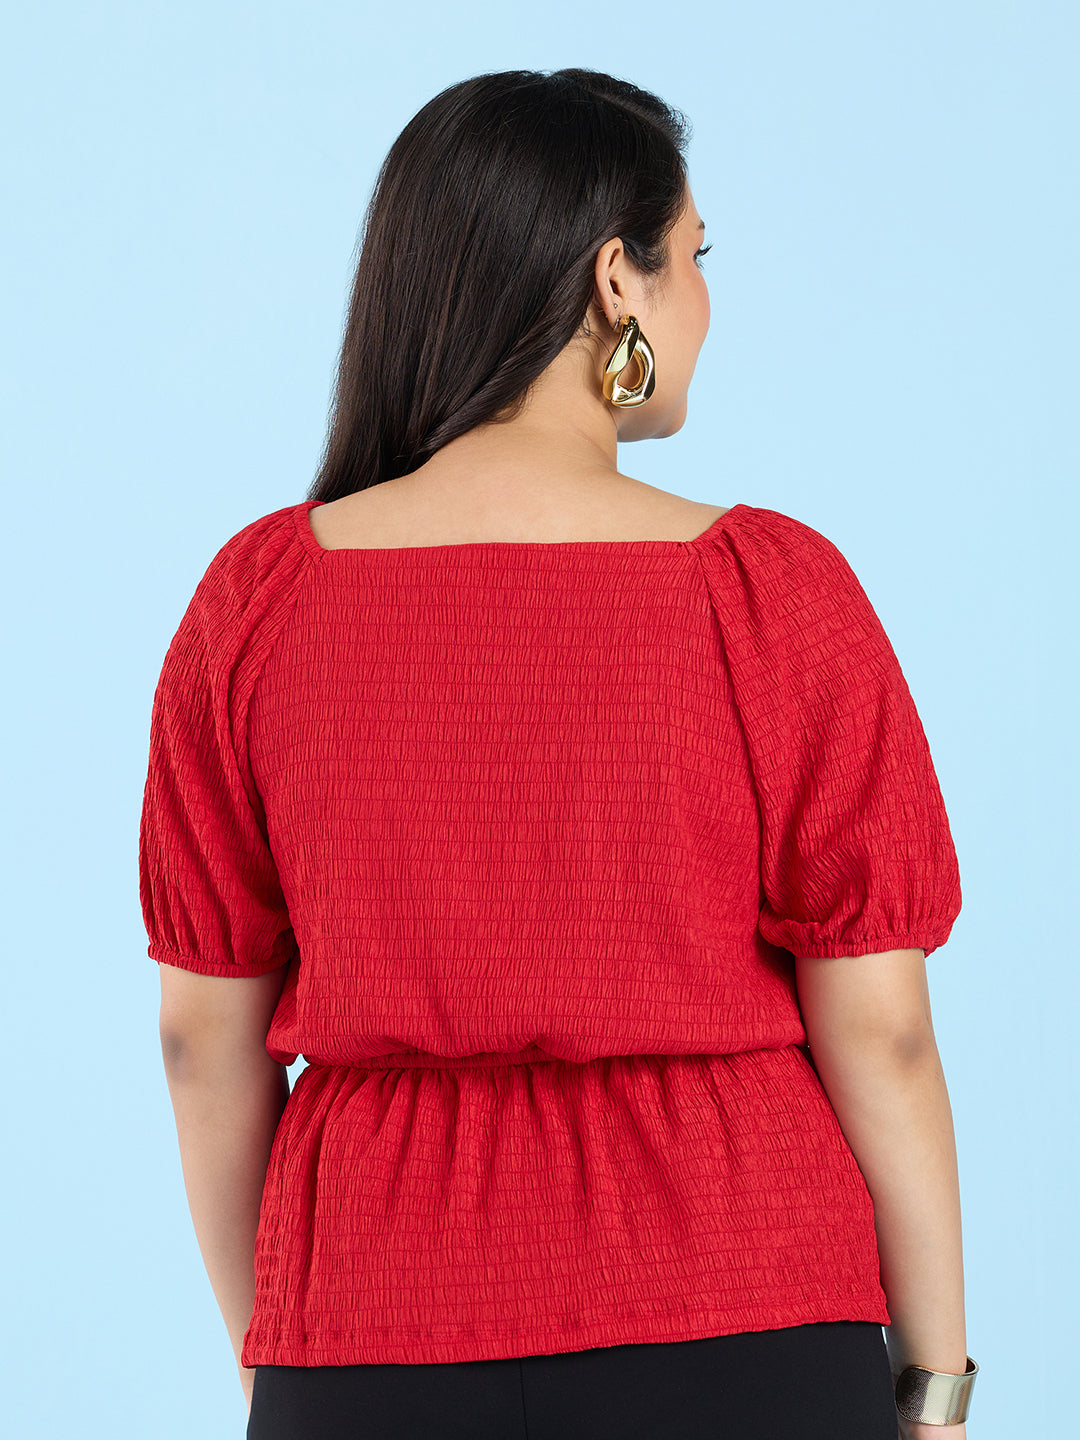 Textured Red Top